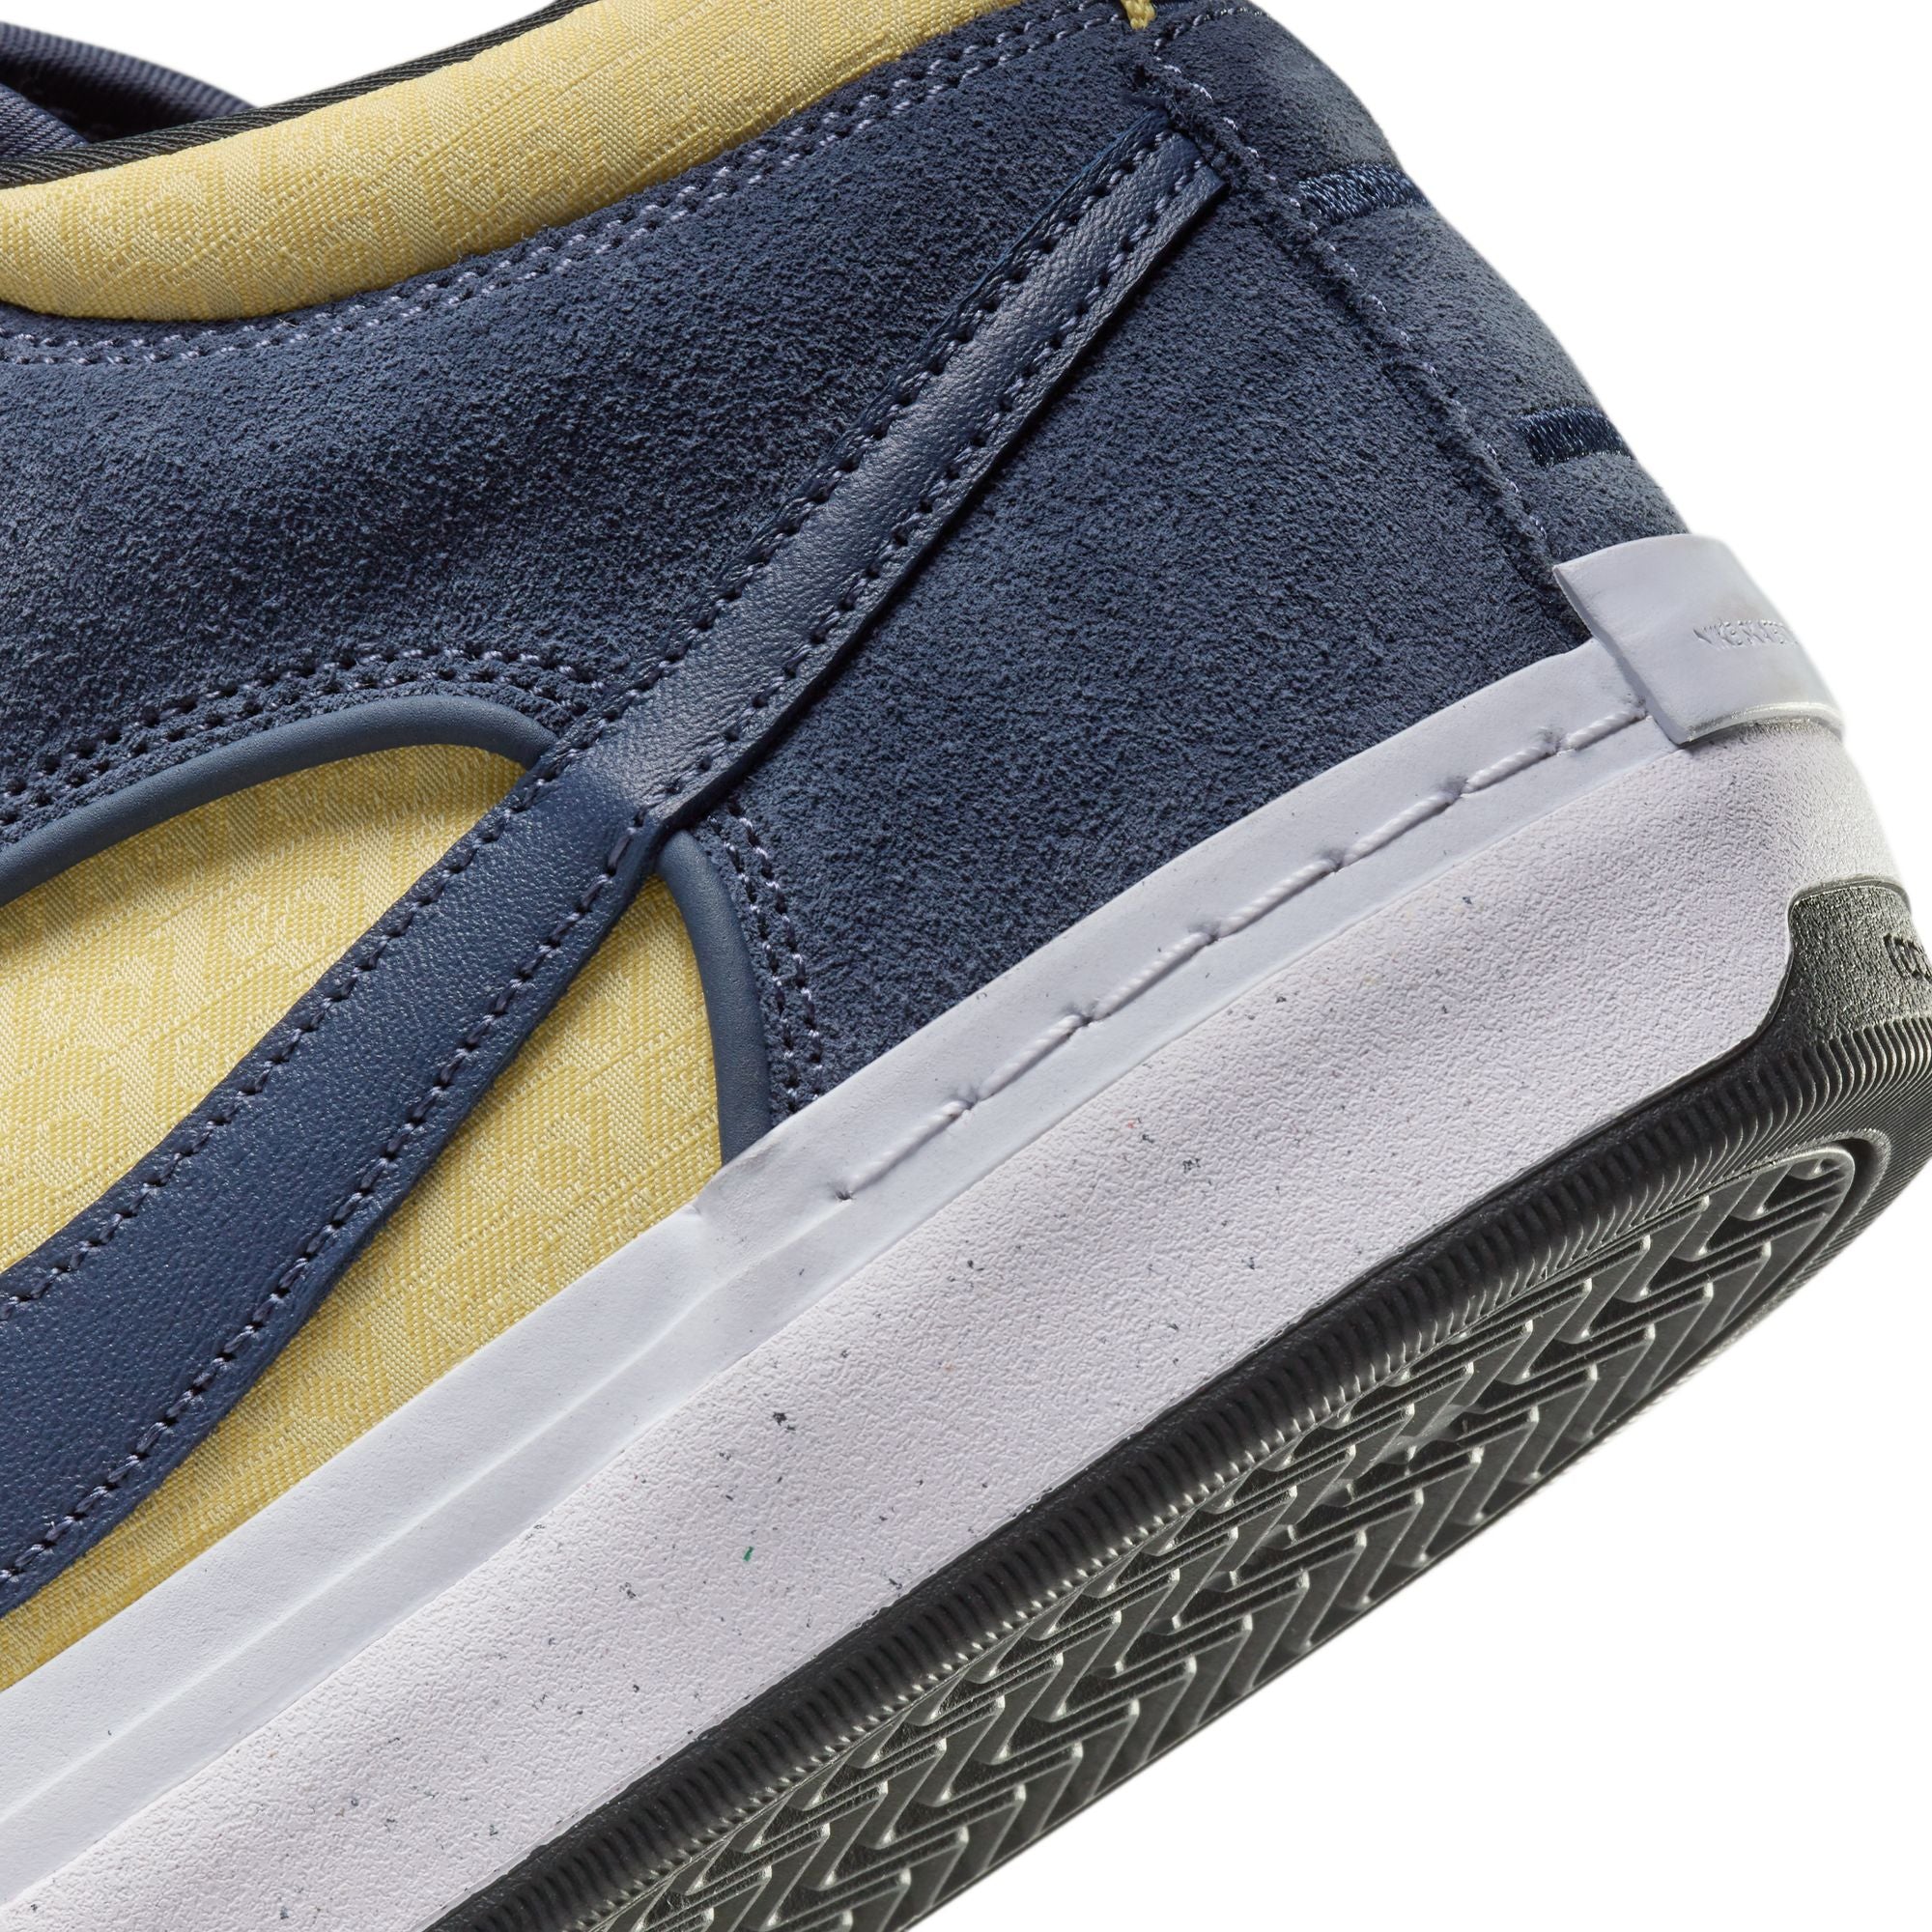 Mid top Nike SB Leo Baker skate shoes, in yellow and blue colourway, with white and black sole.